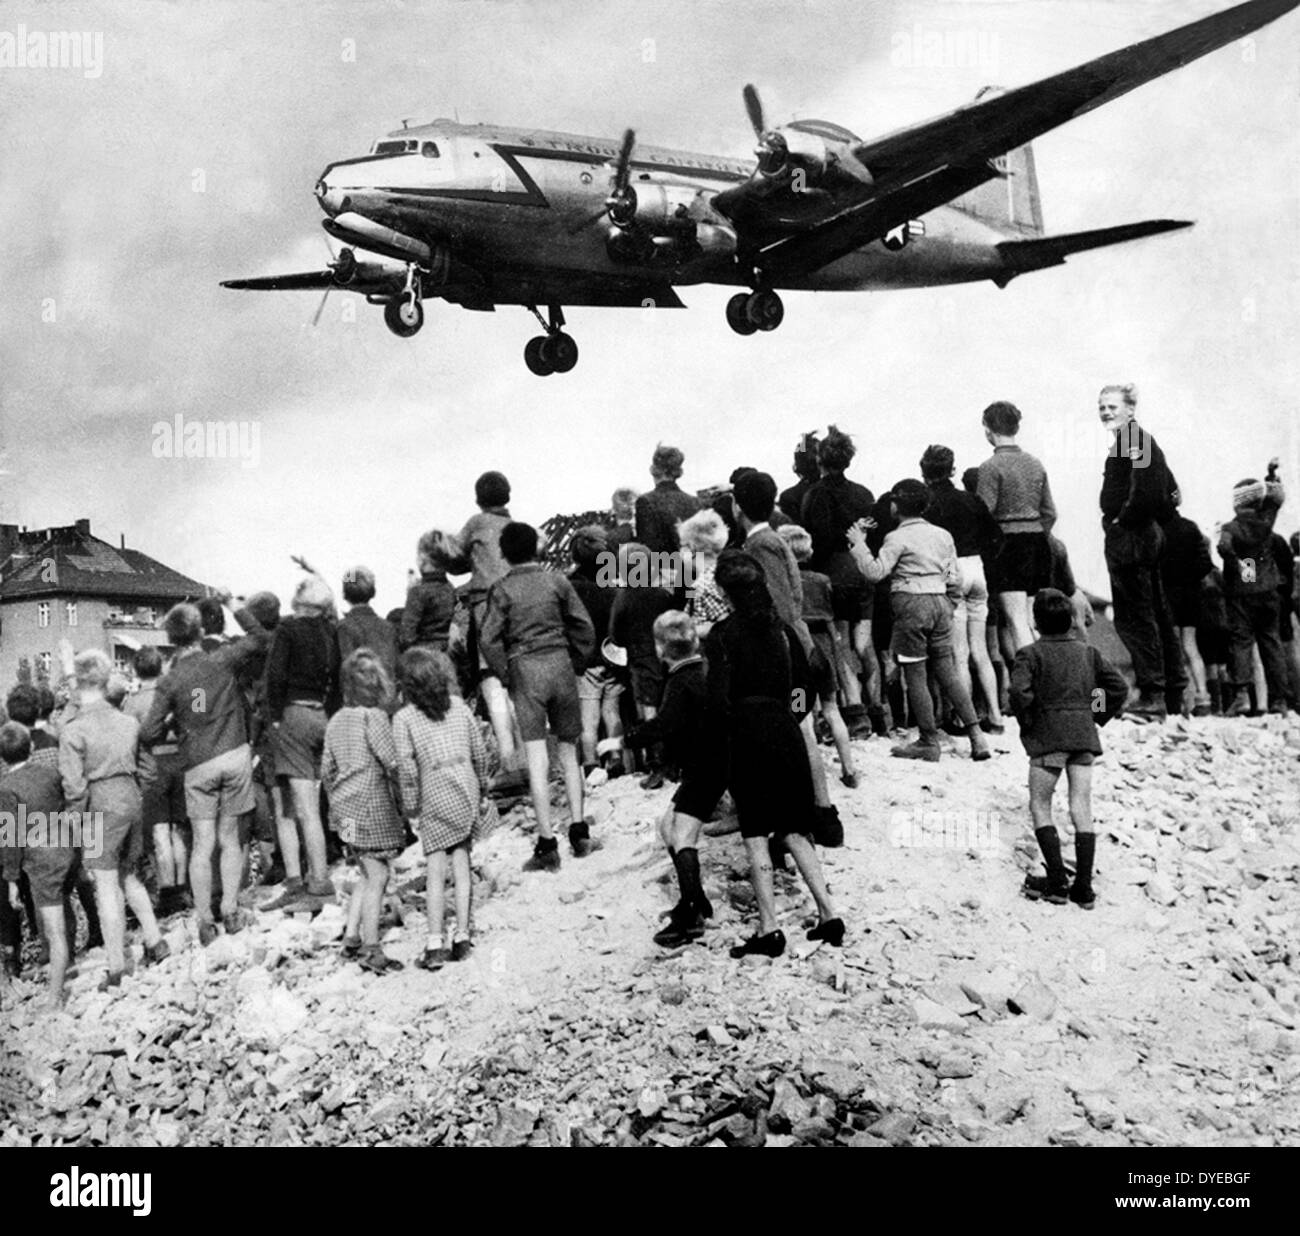 American aircraft drops food and supplies near a crowd of Berliners during the blockade of Berlin (known as the Berlin Airlift) 1948-1949. Stock Photo